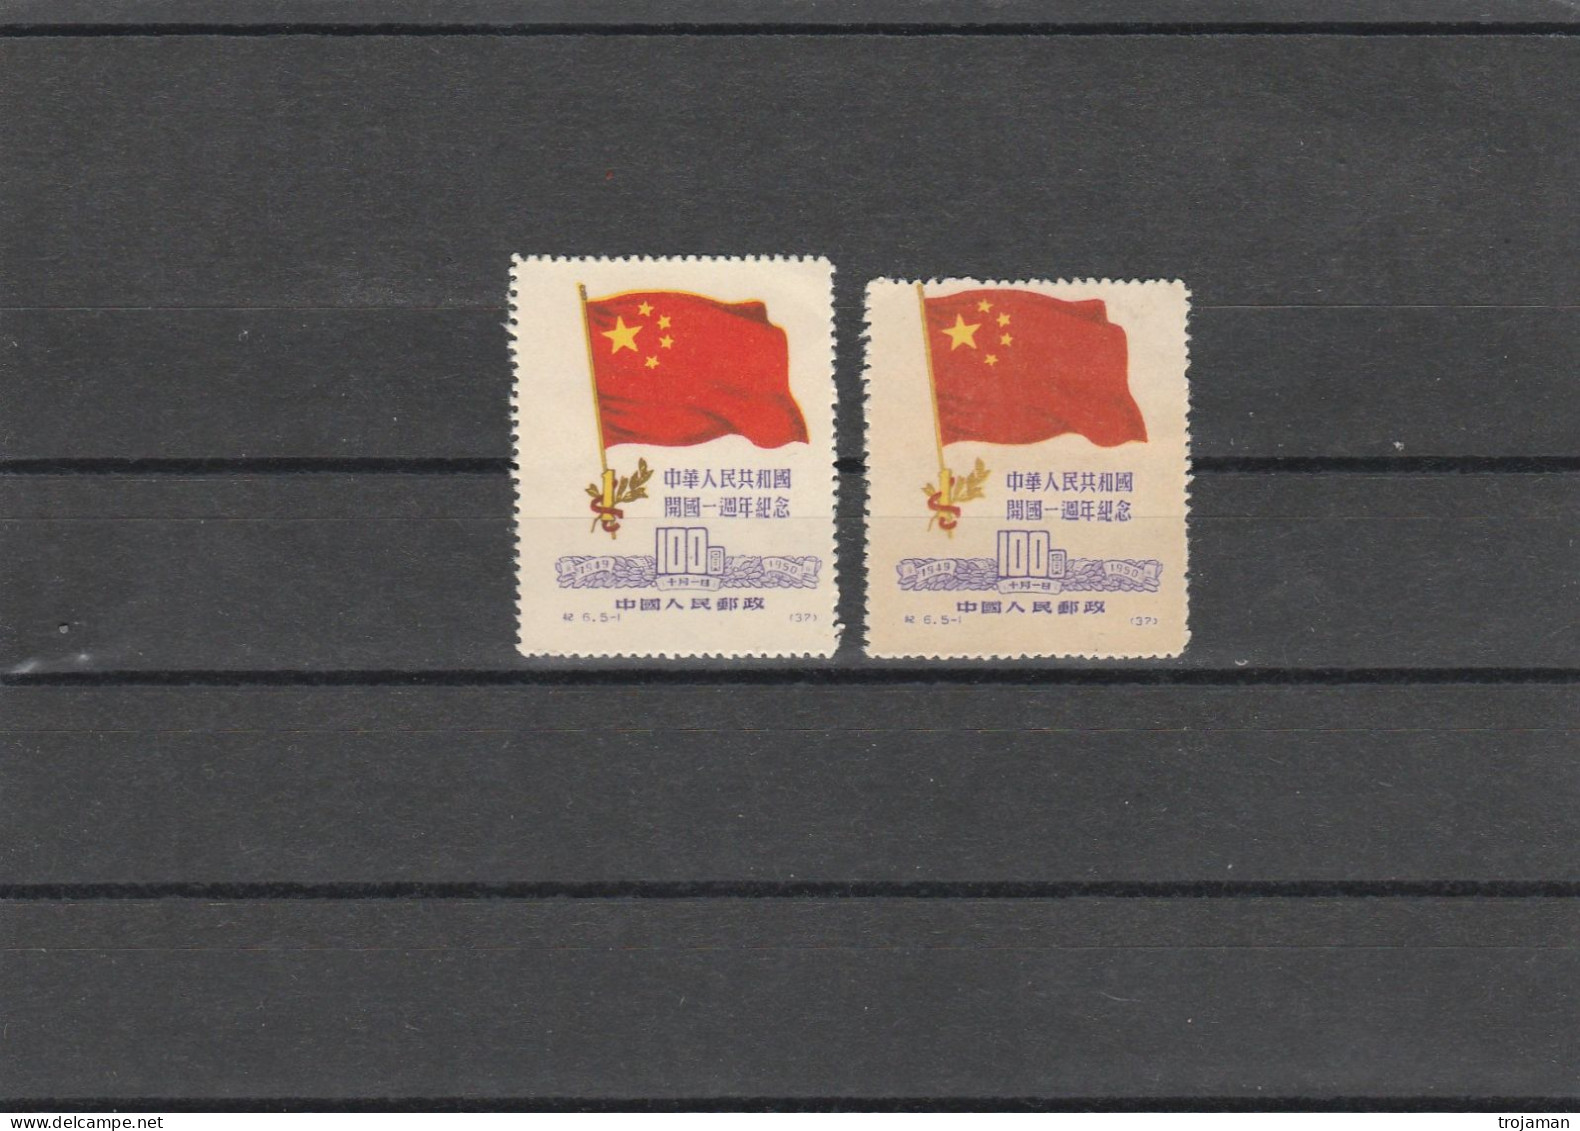 EX-PR-23-09 CHINA1950, 2 STAMPS DIFFERENT SIZE. - Neufs